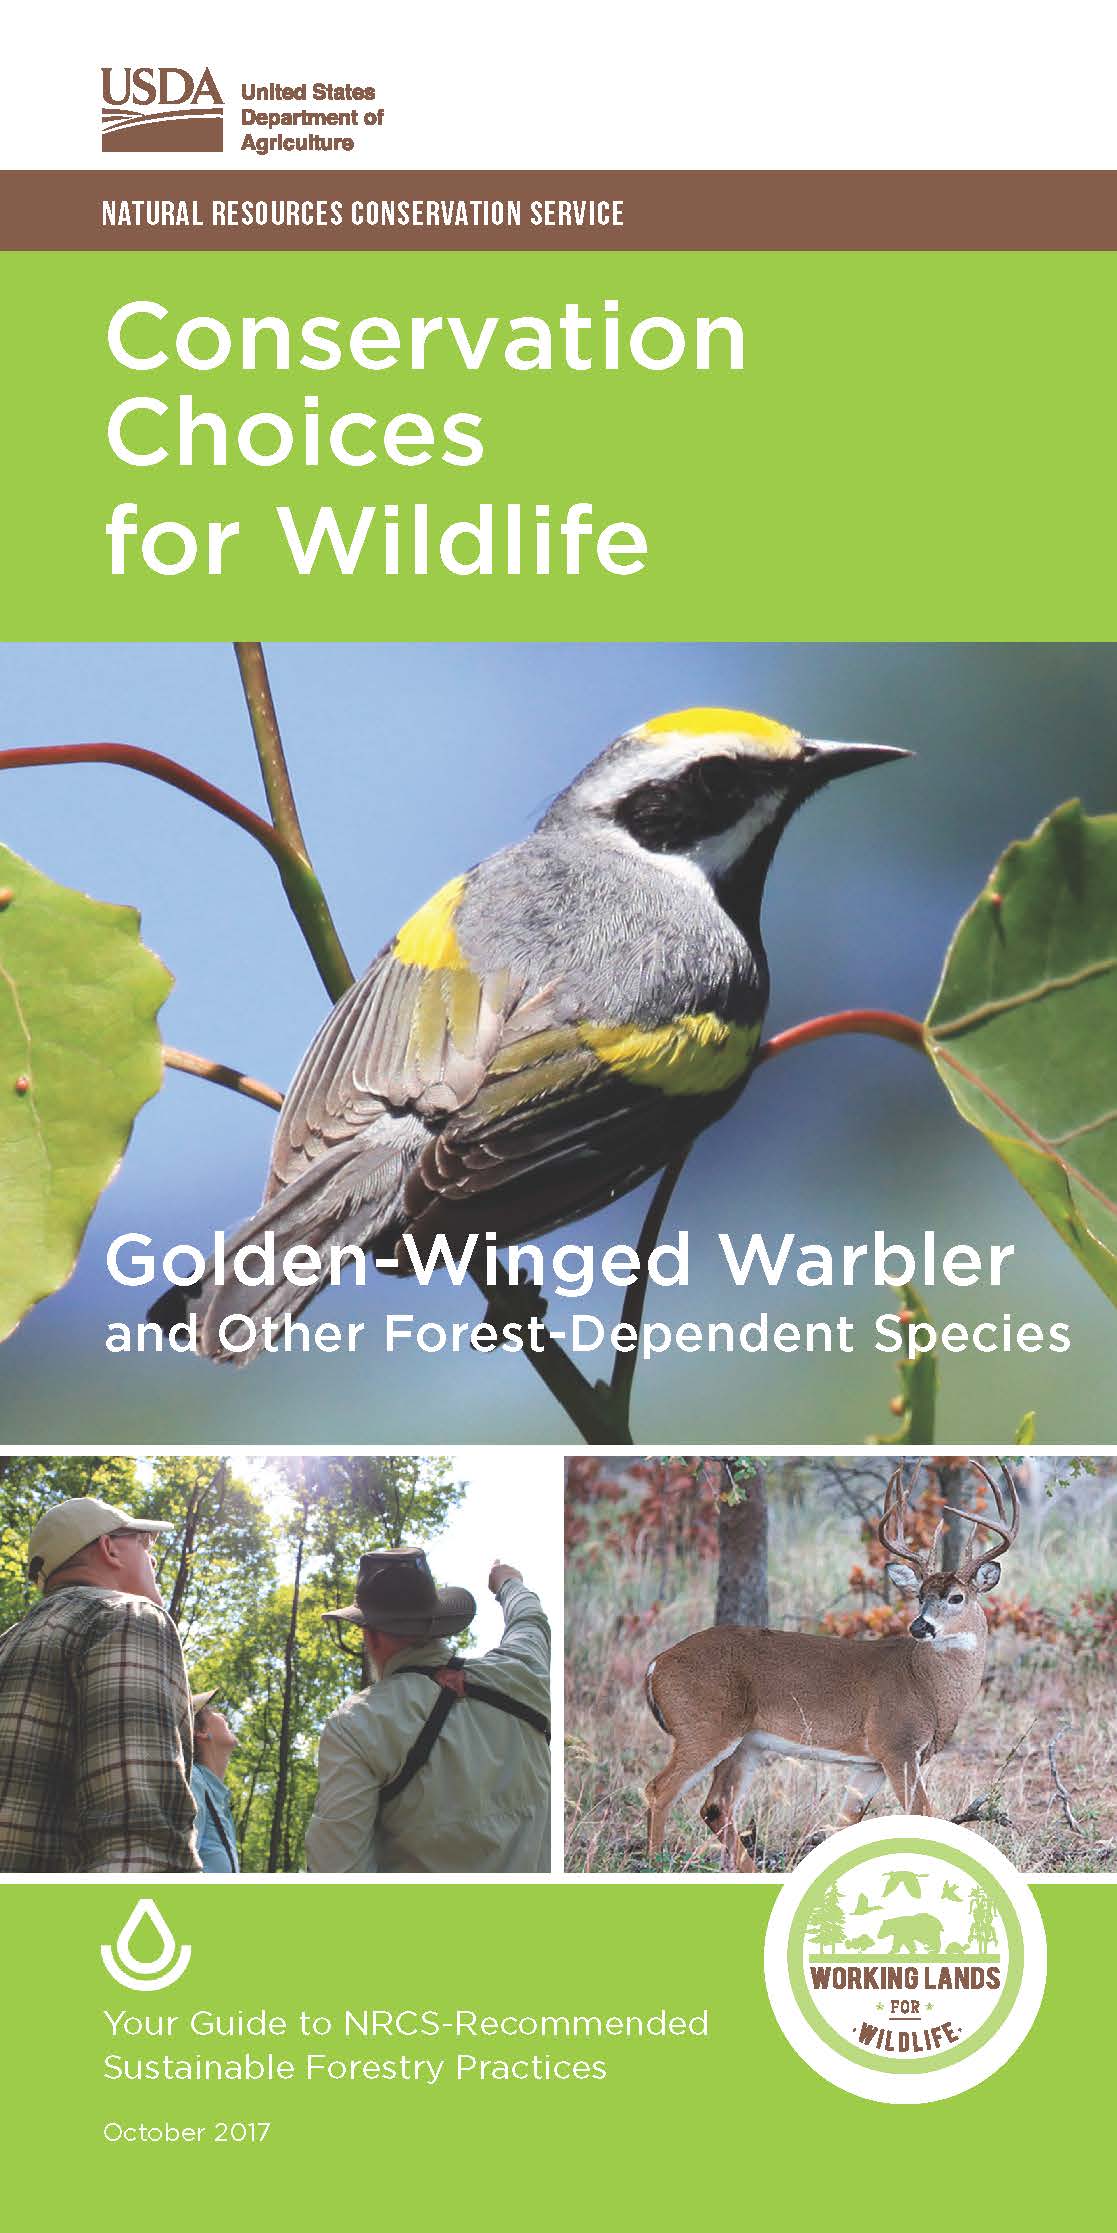 Conservation Choices for Wildlife-Golden-Winged Warbler